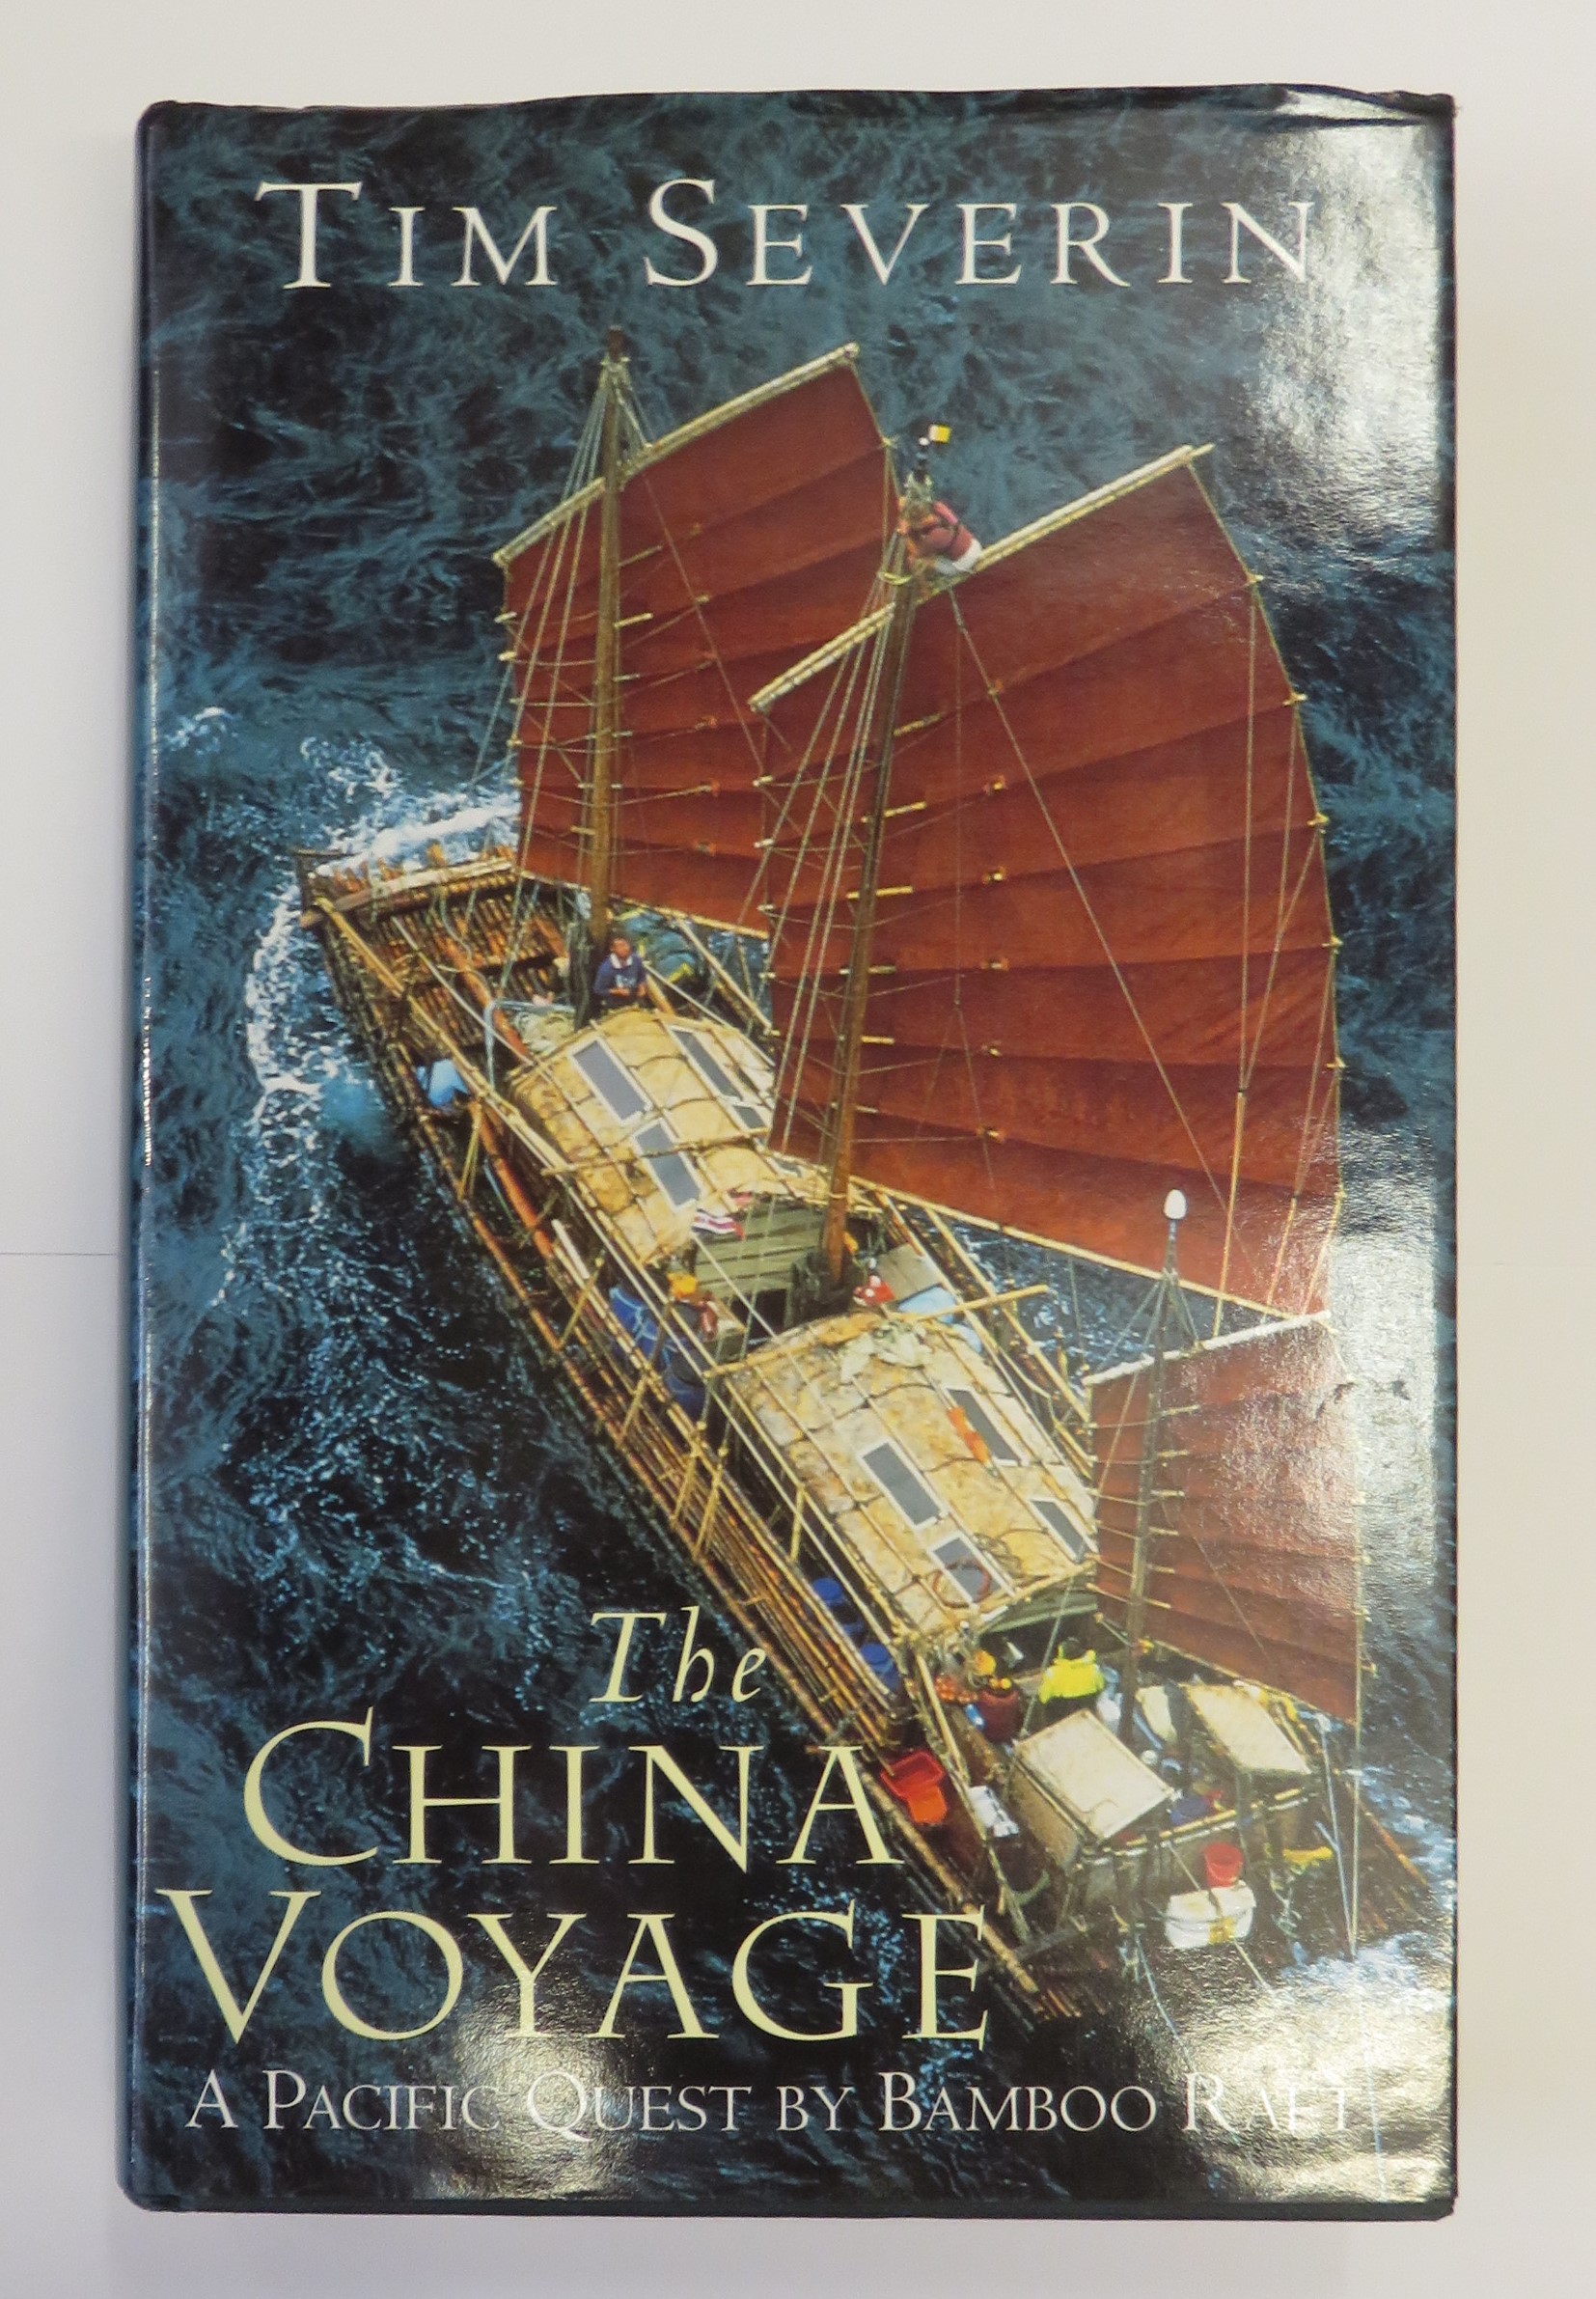 The China Voyage a Pacific Quest by Bamboo Raft